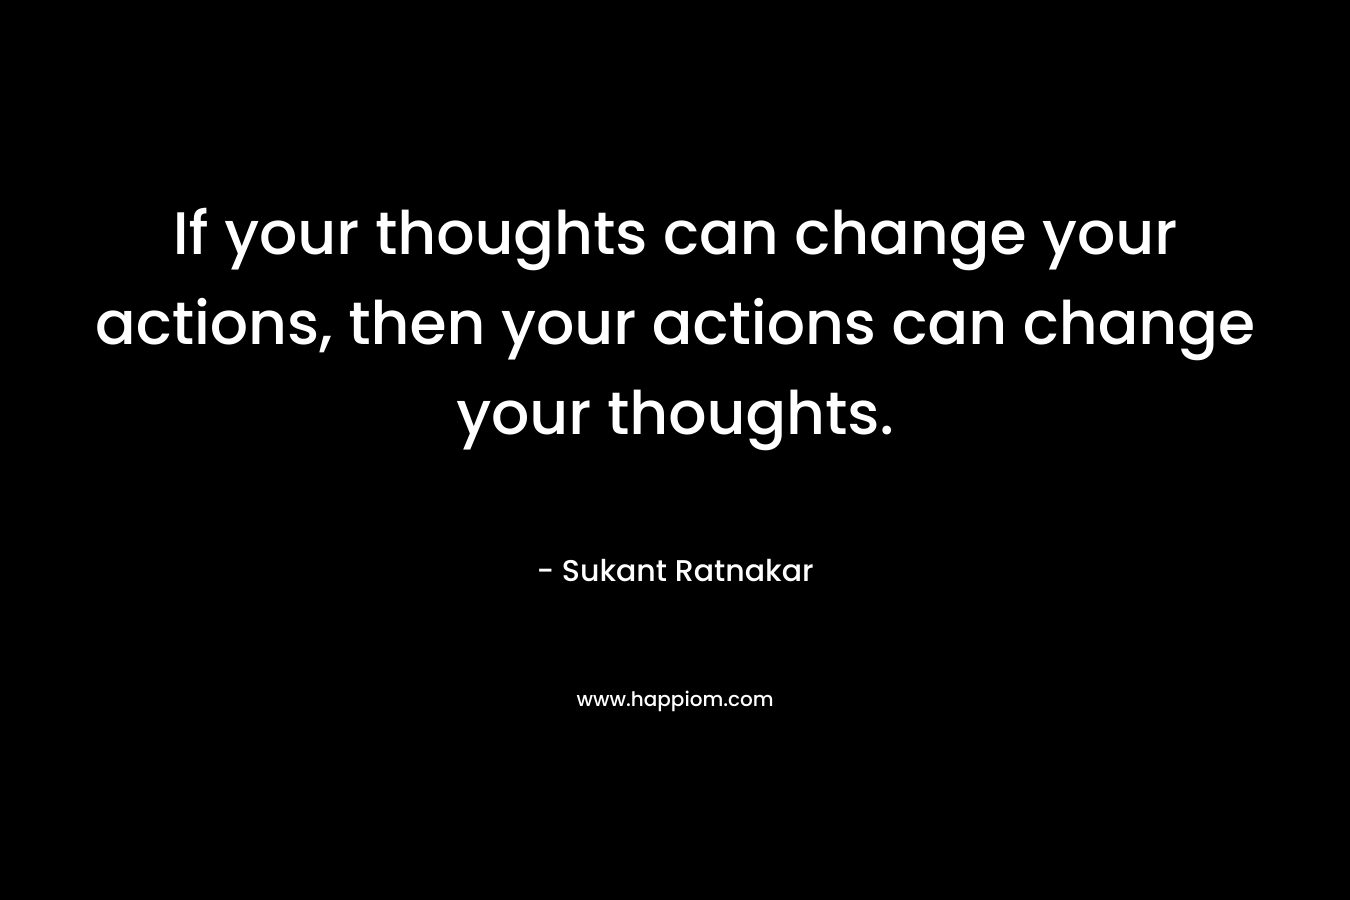 If your thoughts can change your actions, then your actions can change your thoughts.